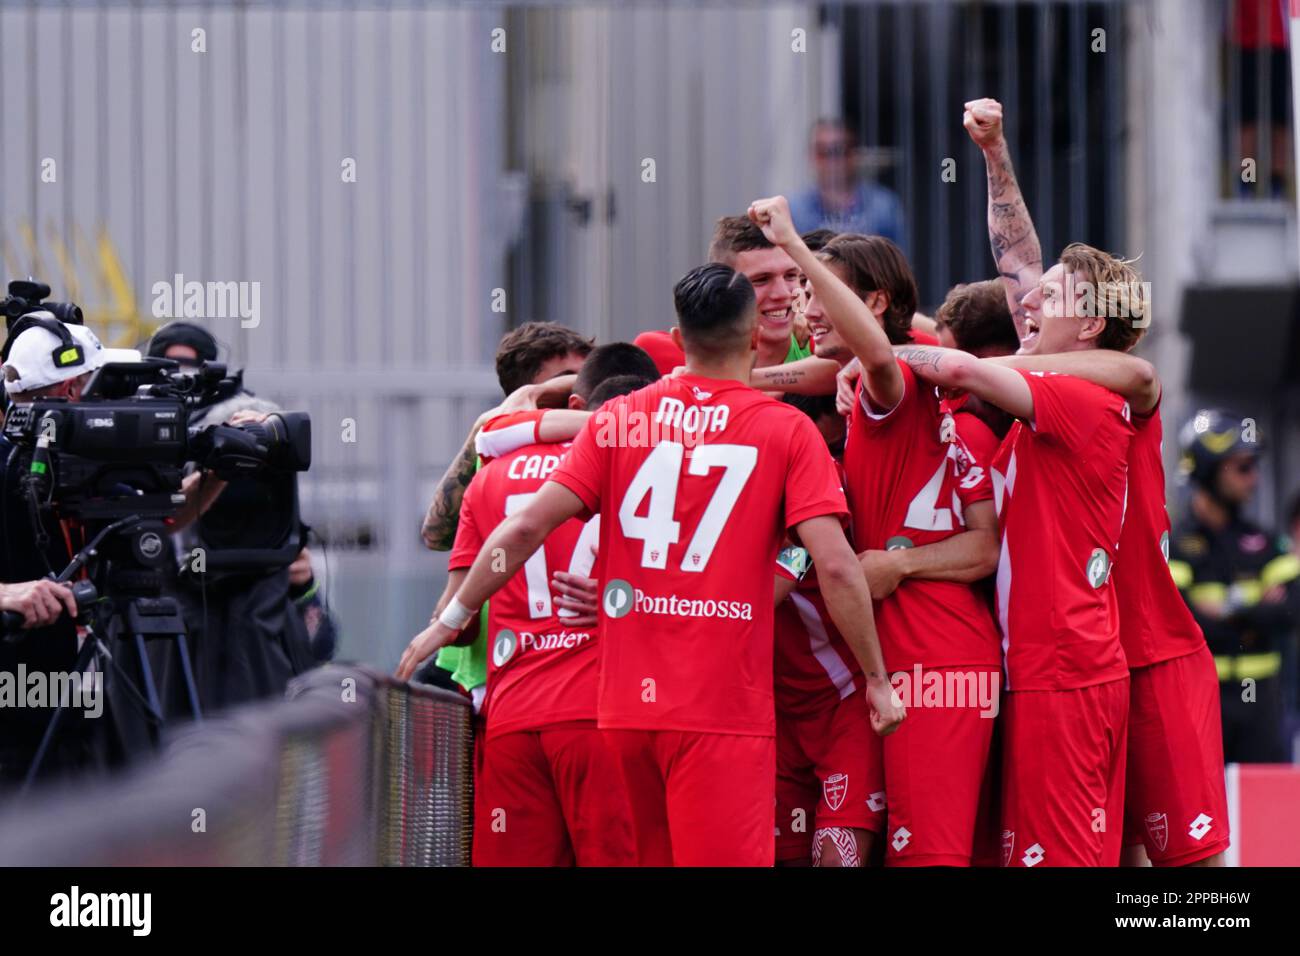 Monza, Italy. 23rd Apr, 2023. Monza, Italy. 23rd Apr, 2023. the team (AC Monza) celebrates the goal of Matteo Pessina (AC Monza) during the Italian championship Serie A football match between AC Monza and ACF Fiorentina on April 23, 2023 at U-Power Stadium in Monza, Italy - Credit: Luca Rossini/E-Mage/Alamy Live News Credit: Luca Rossini/E-Mage/Alamy Live News Credit: Luca Rossini/E-Mage/Alamy Live News Stock Photo